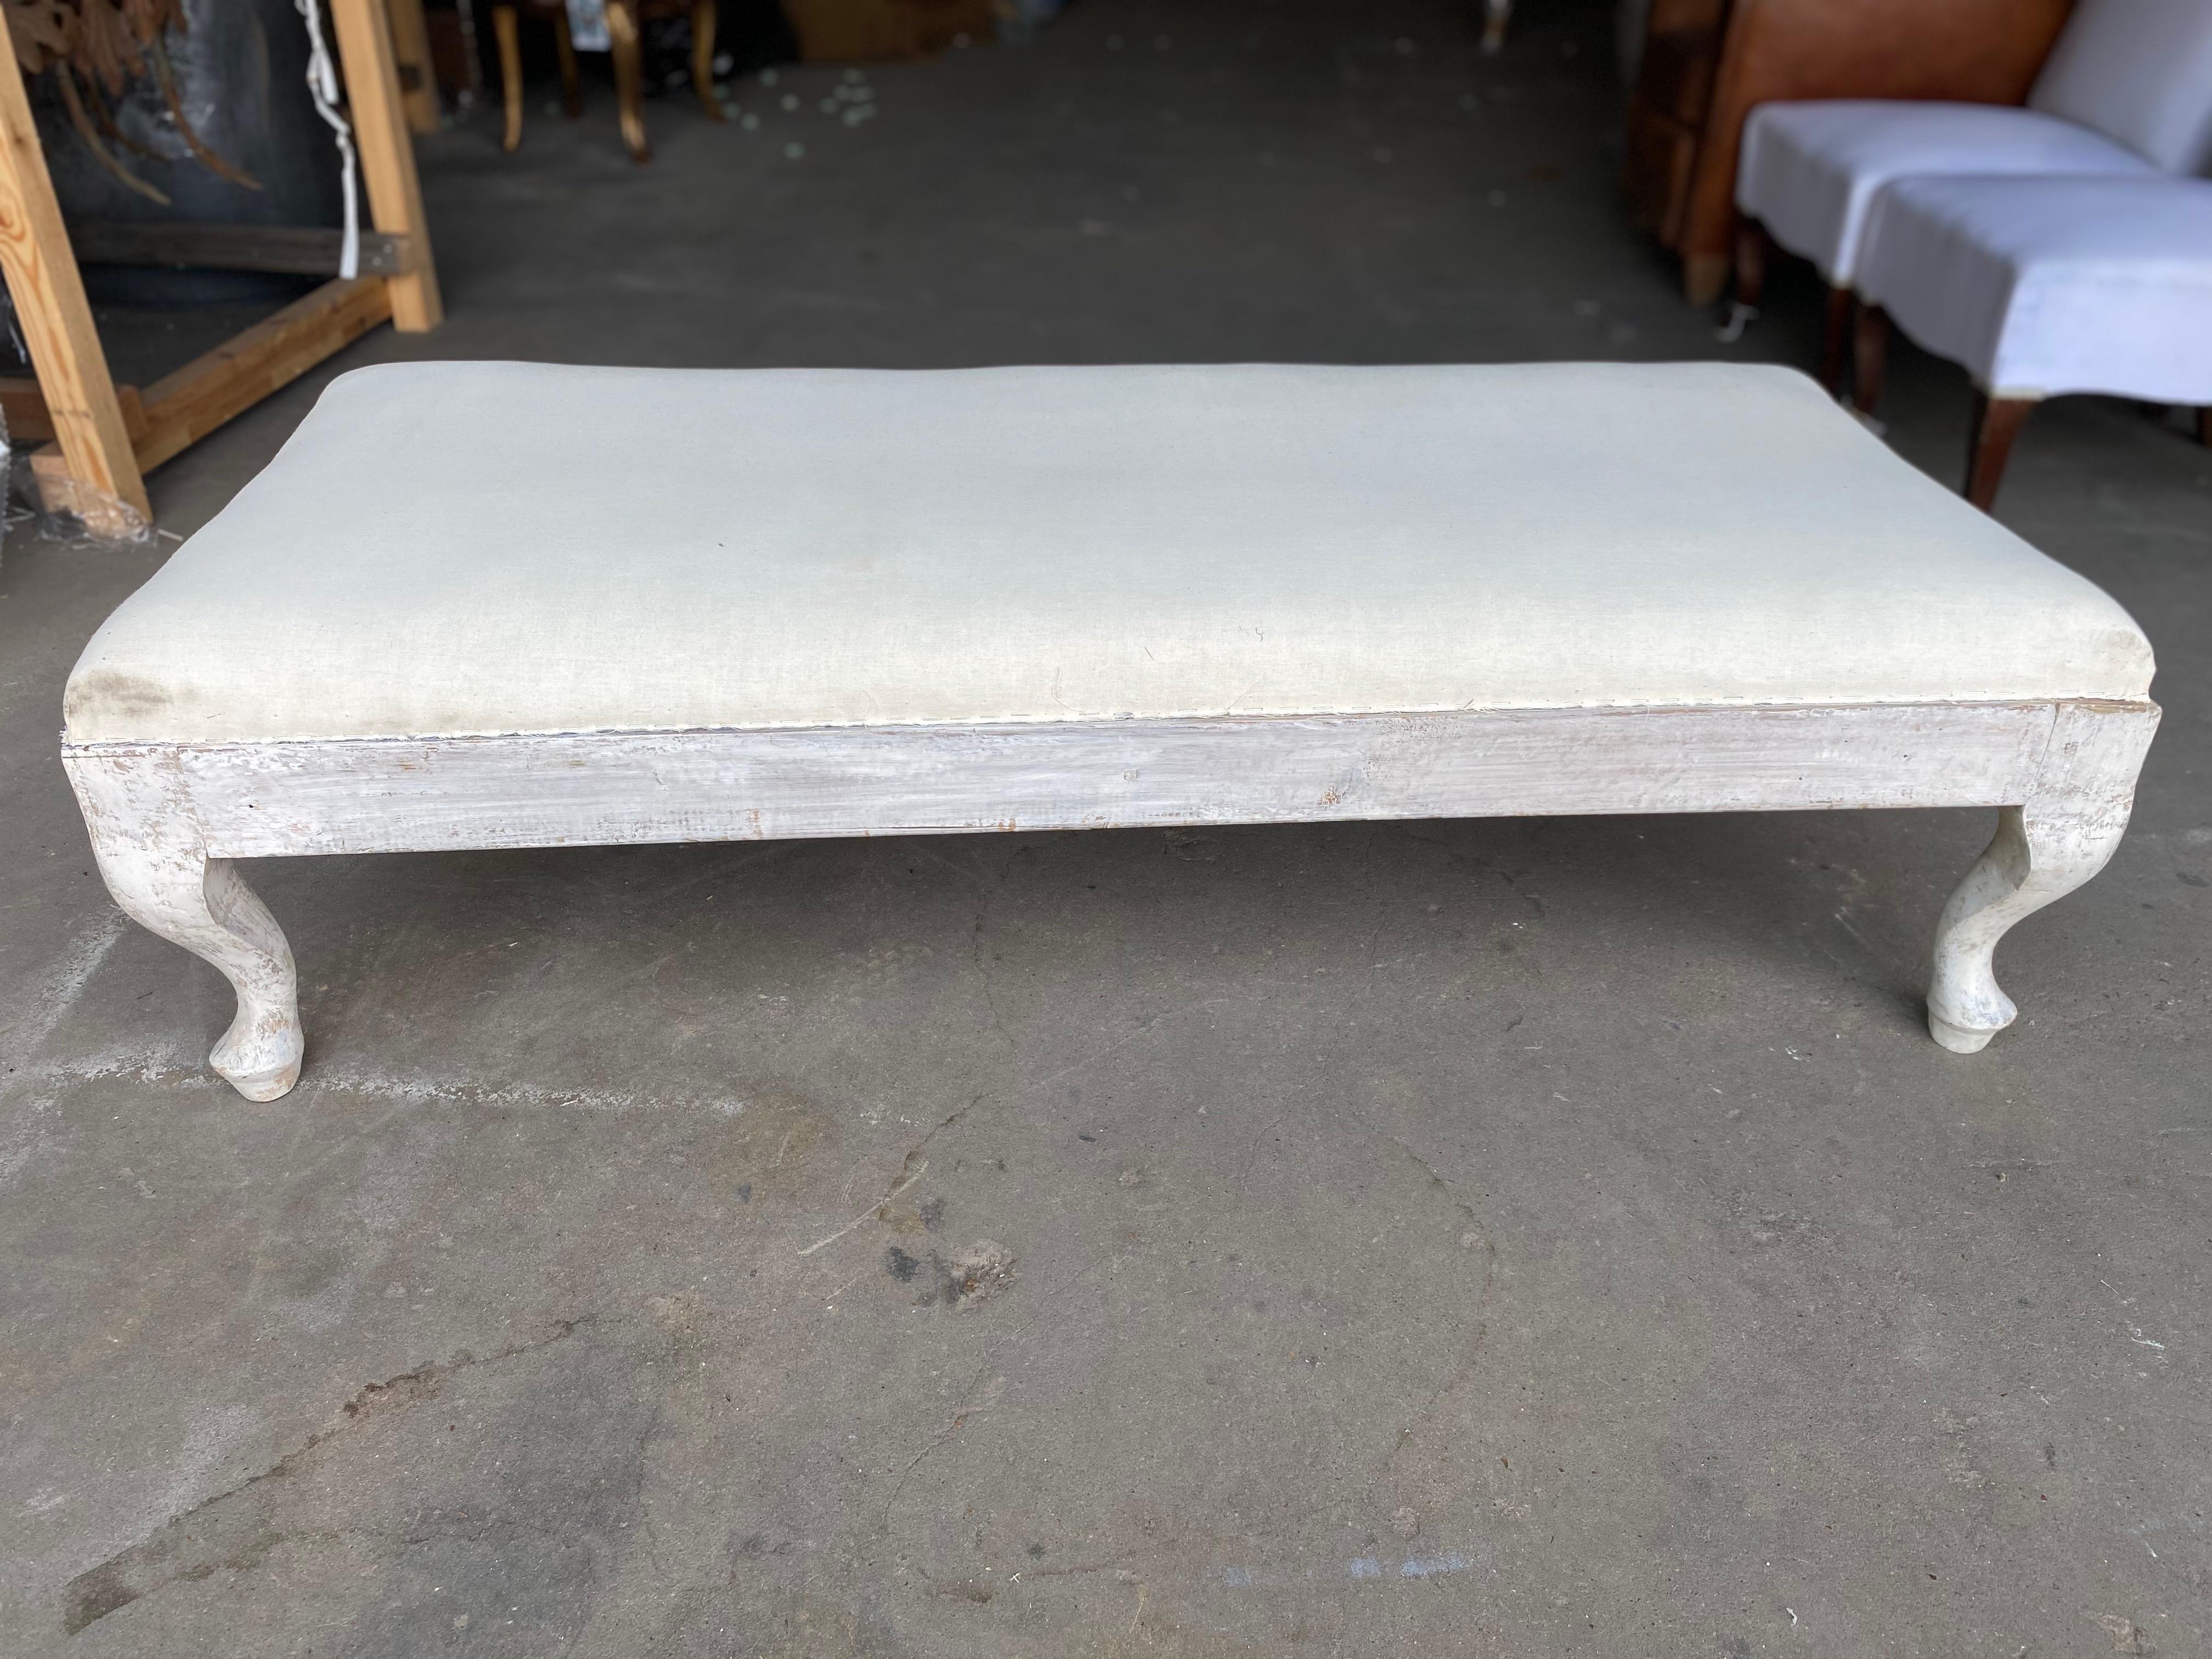 Here is an absolutely stunning early 19th century rococo Swedish bench. This beautiful piece has been dry scrapped to the original paint. It features a white color palette throughout with shell carved details on the border and beautifully curved